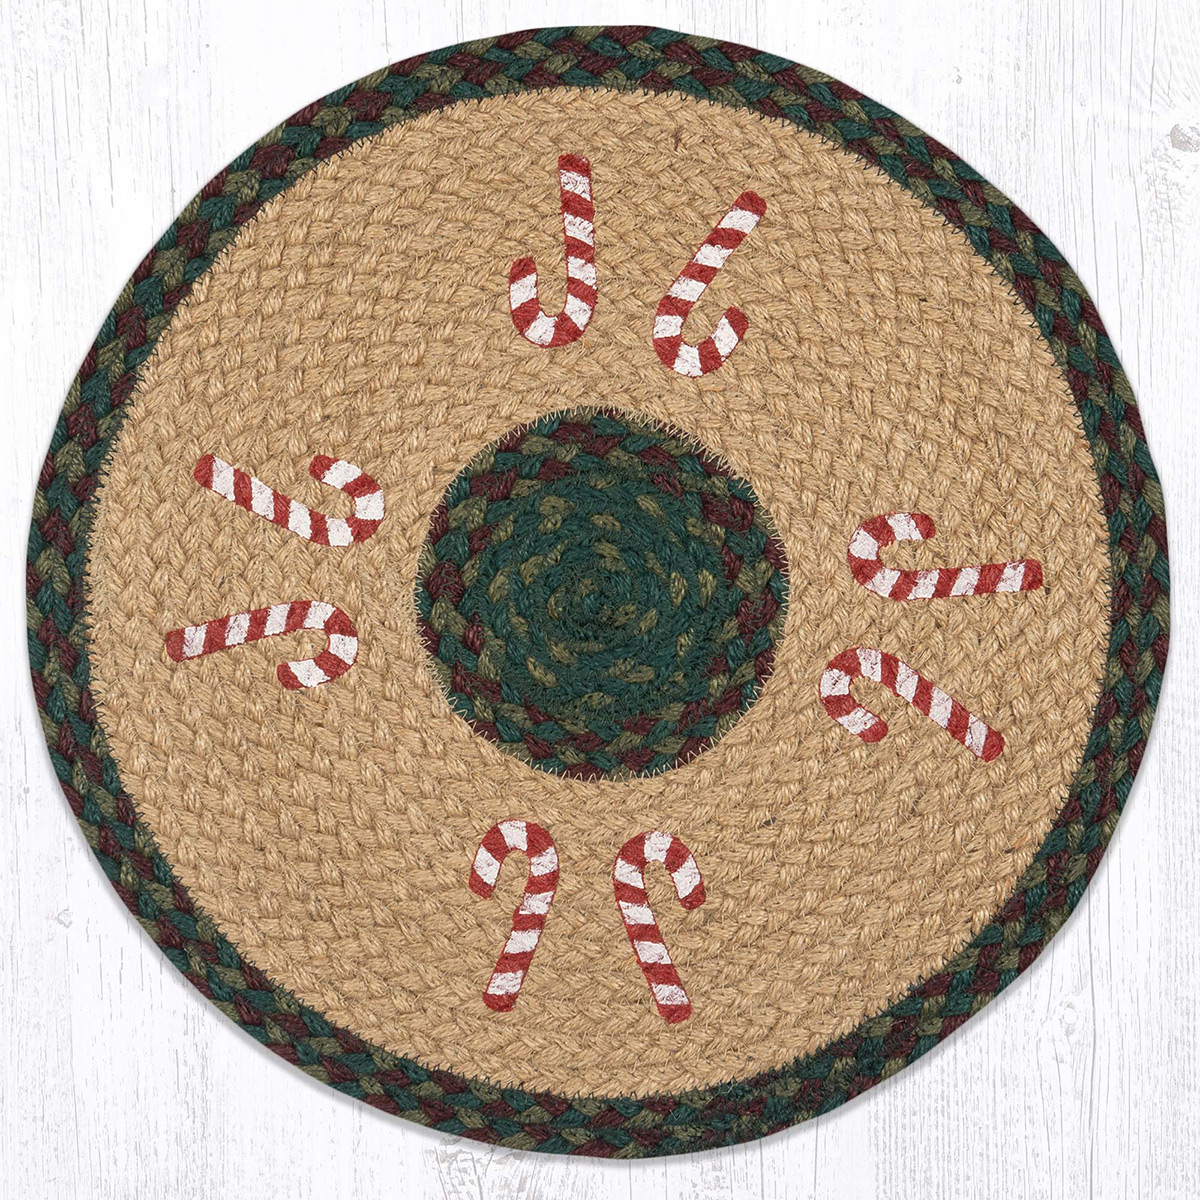 Candy Cane Round Braided Placemat - The Weed Patch